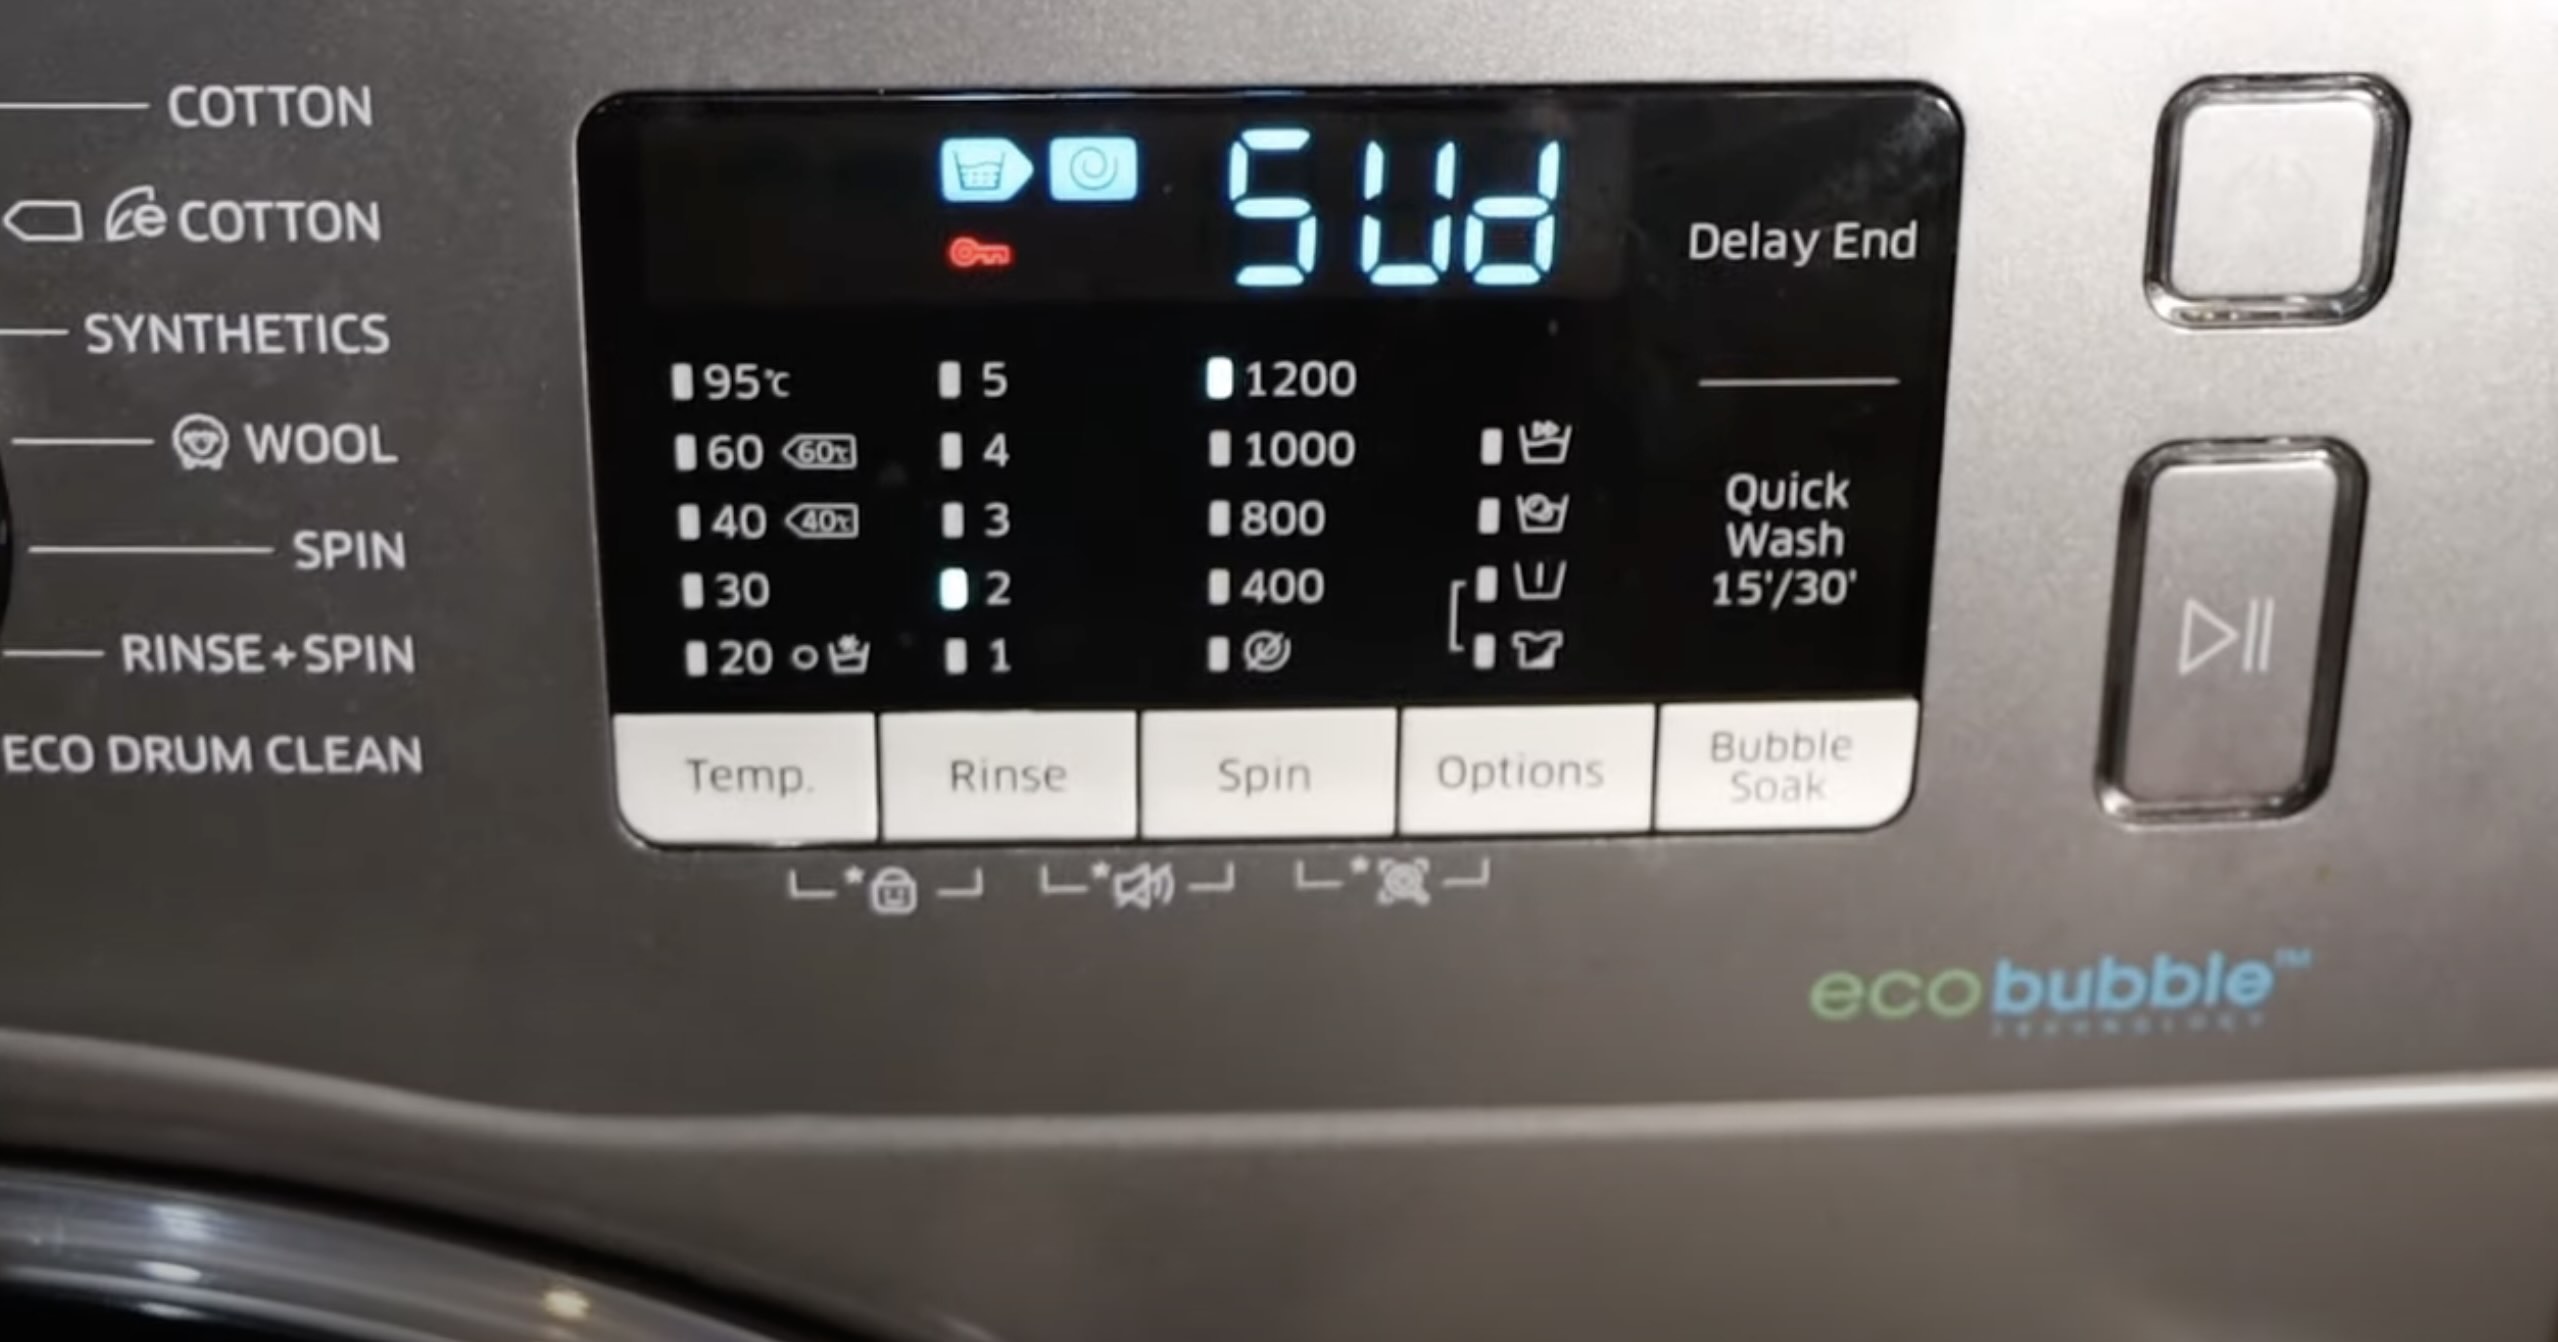 What Does Sud Mean On Washing Machine